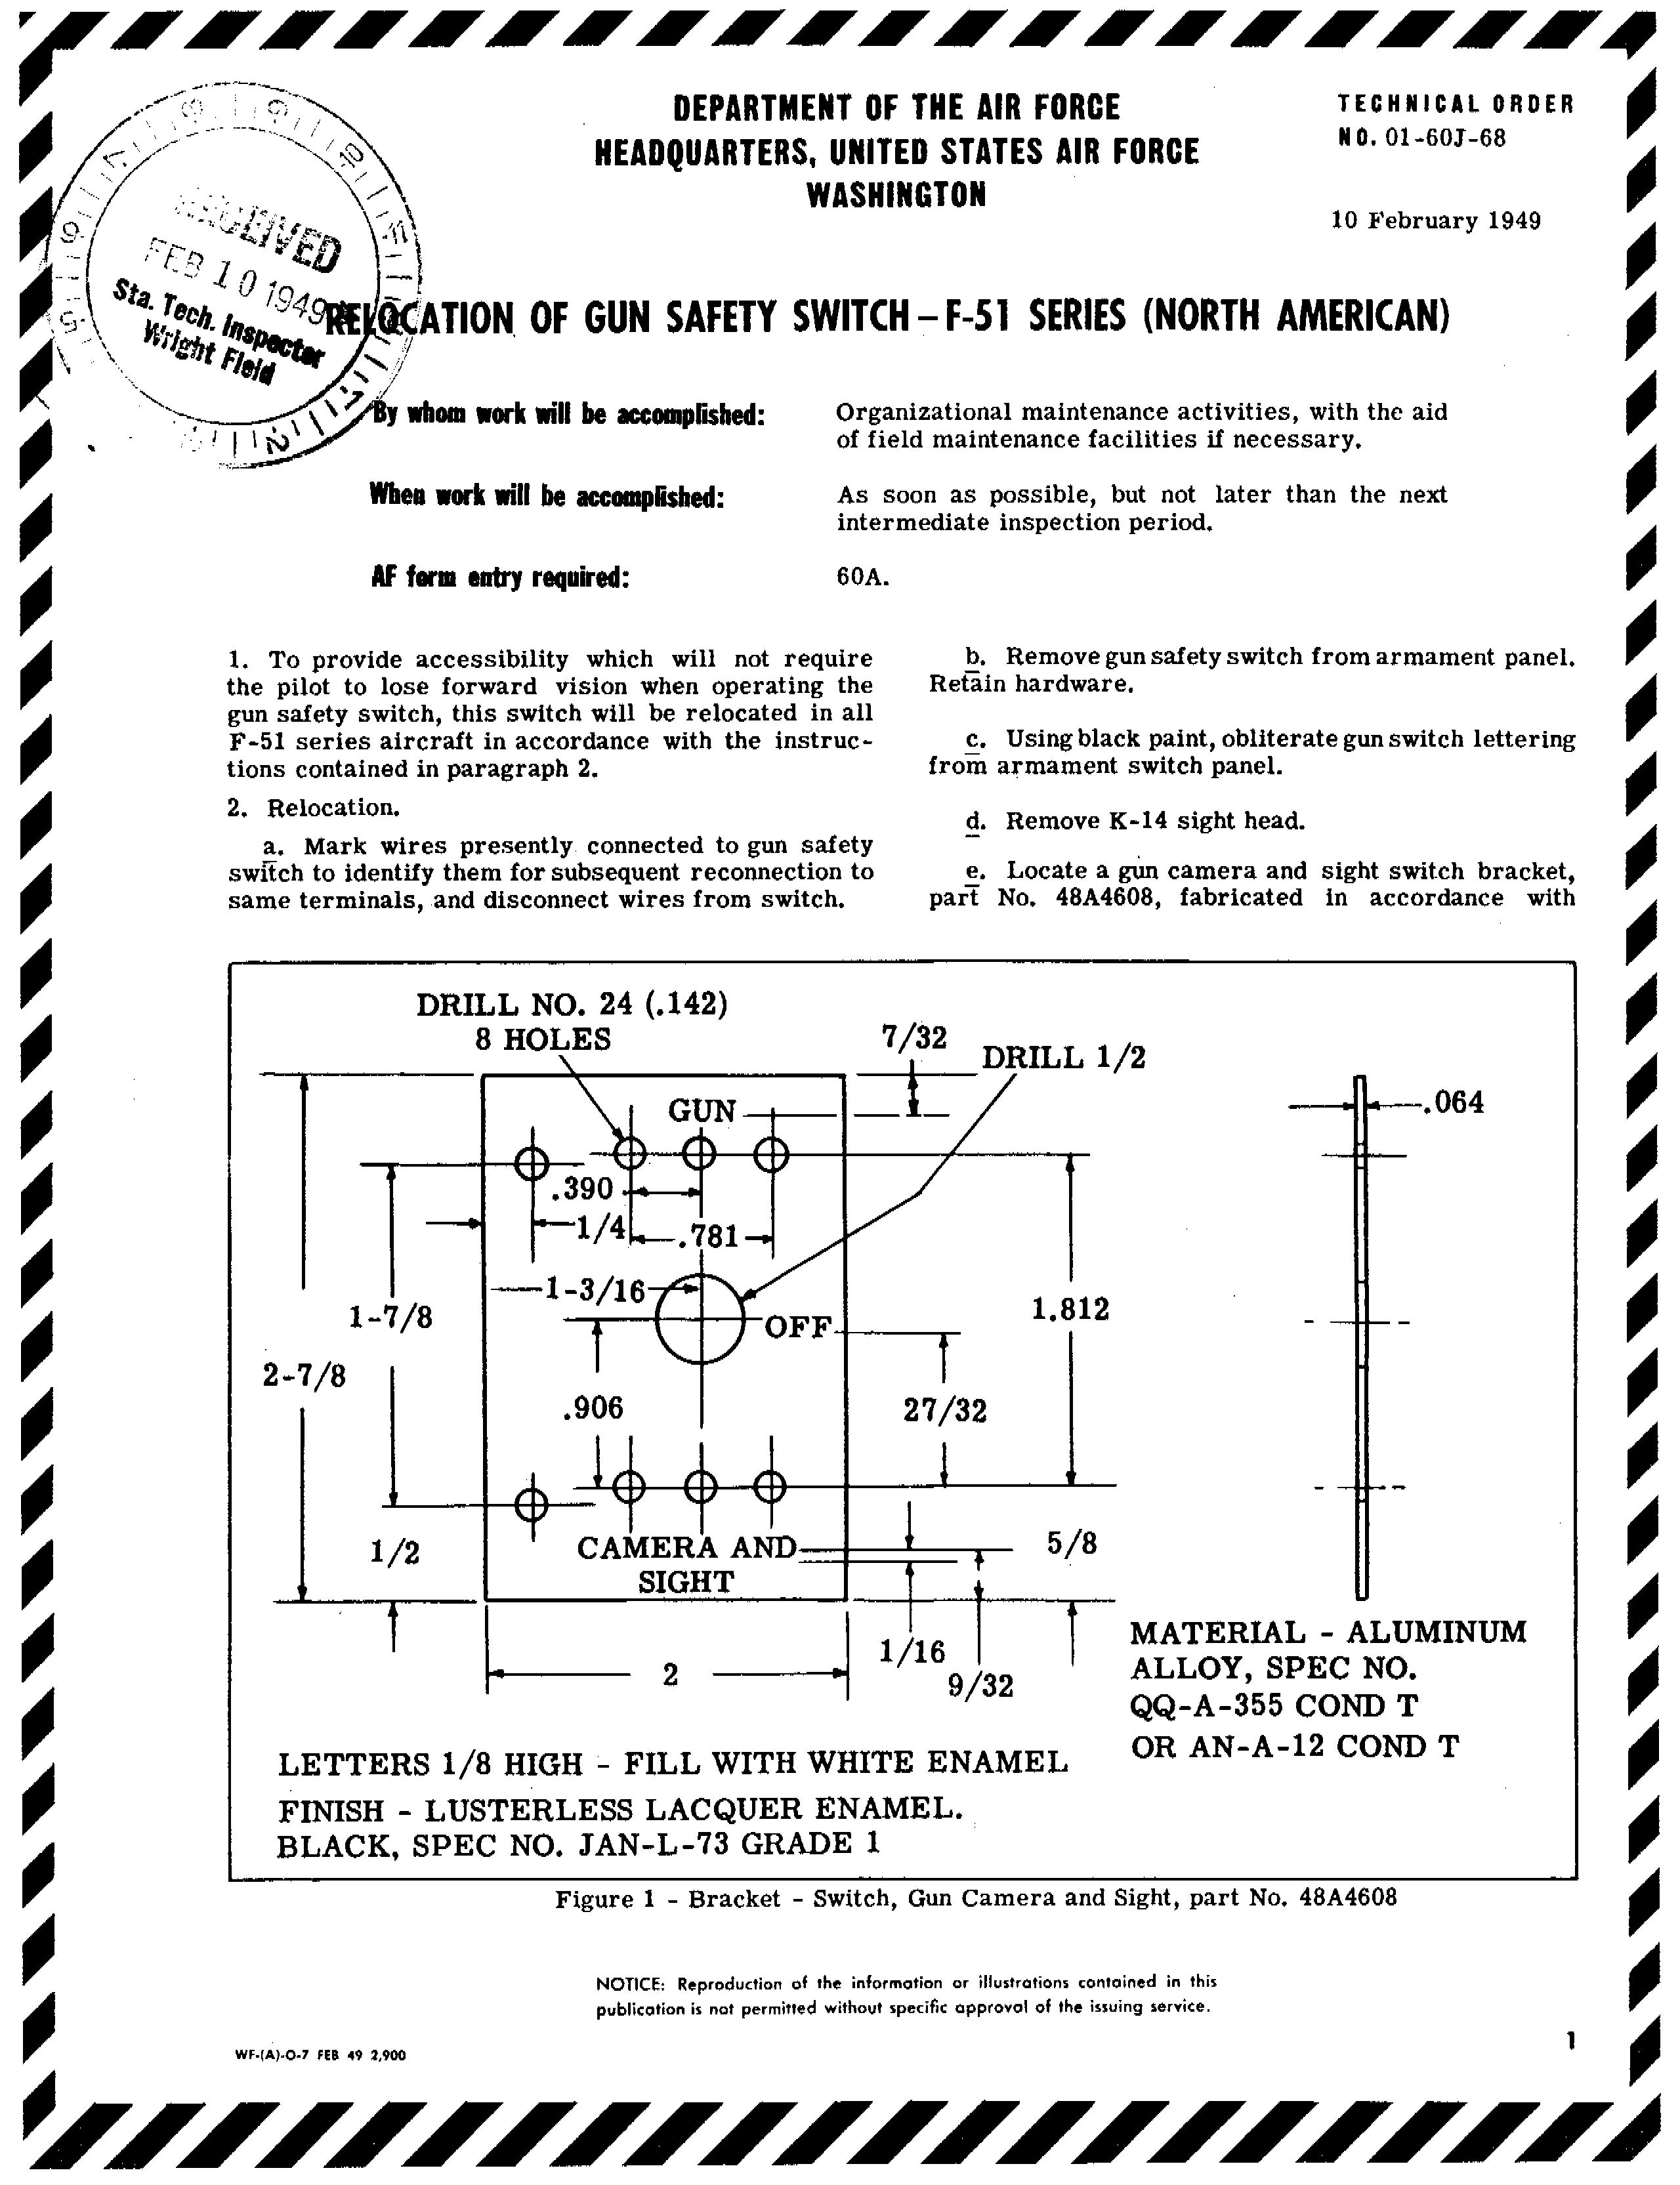 Sample page 1 from AirCorps Library document: Relocation of Gun Safety Switch for F-51 Series